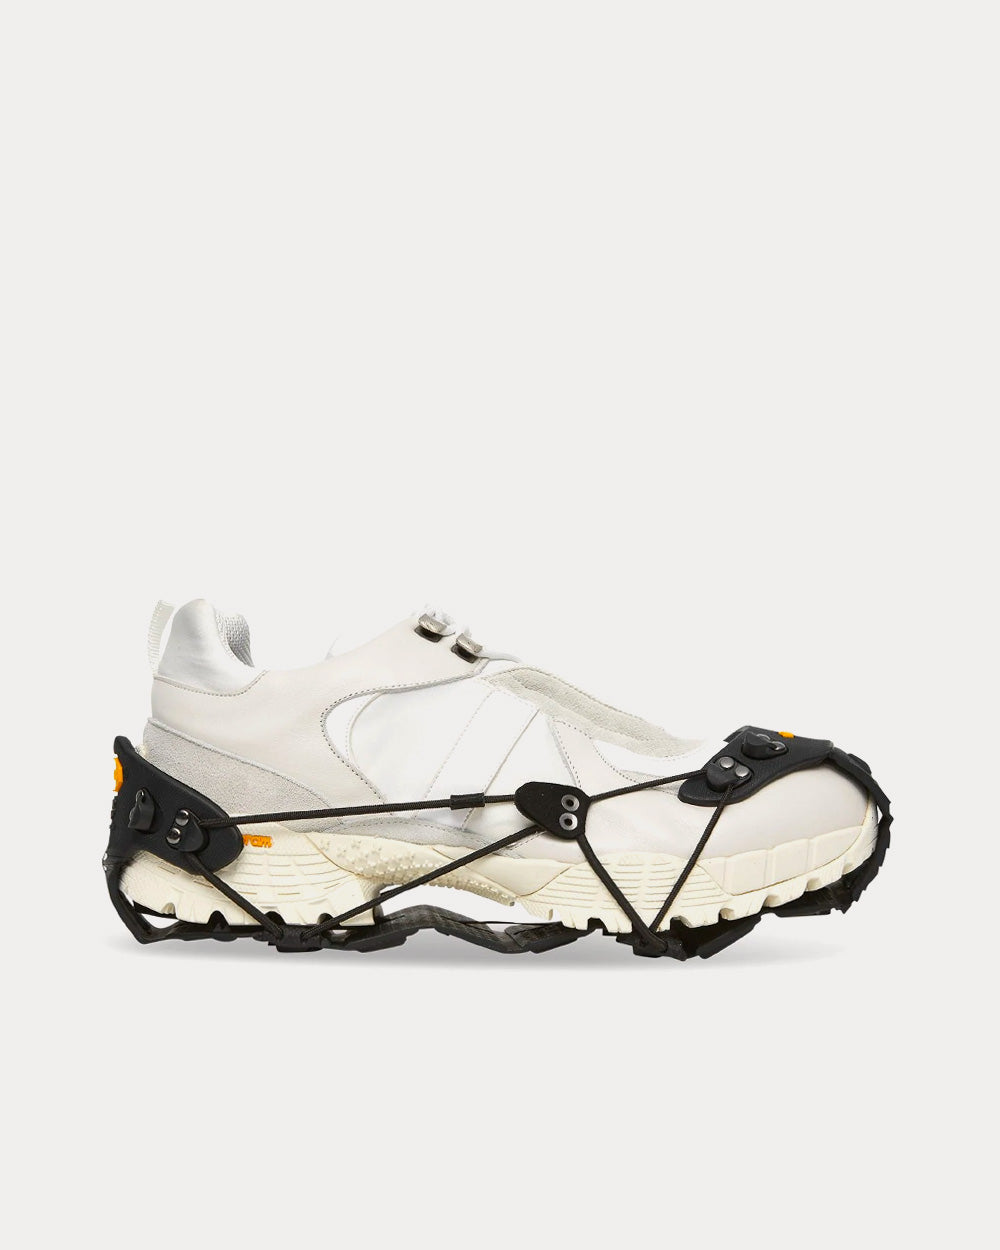 Hiking Boot With Vibram Sole White Low Top Sneakers